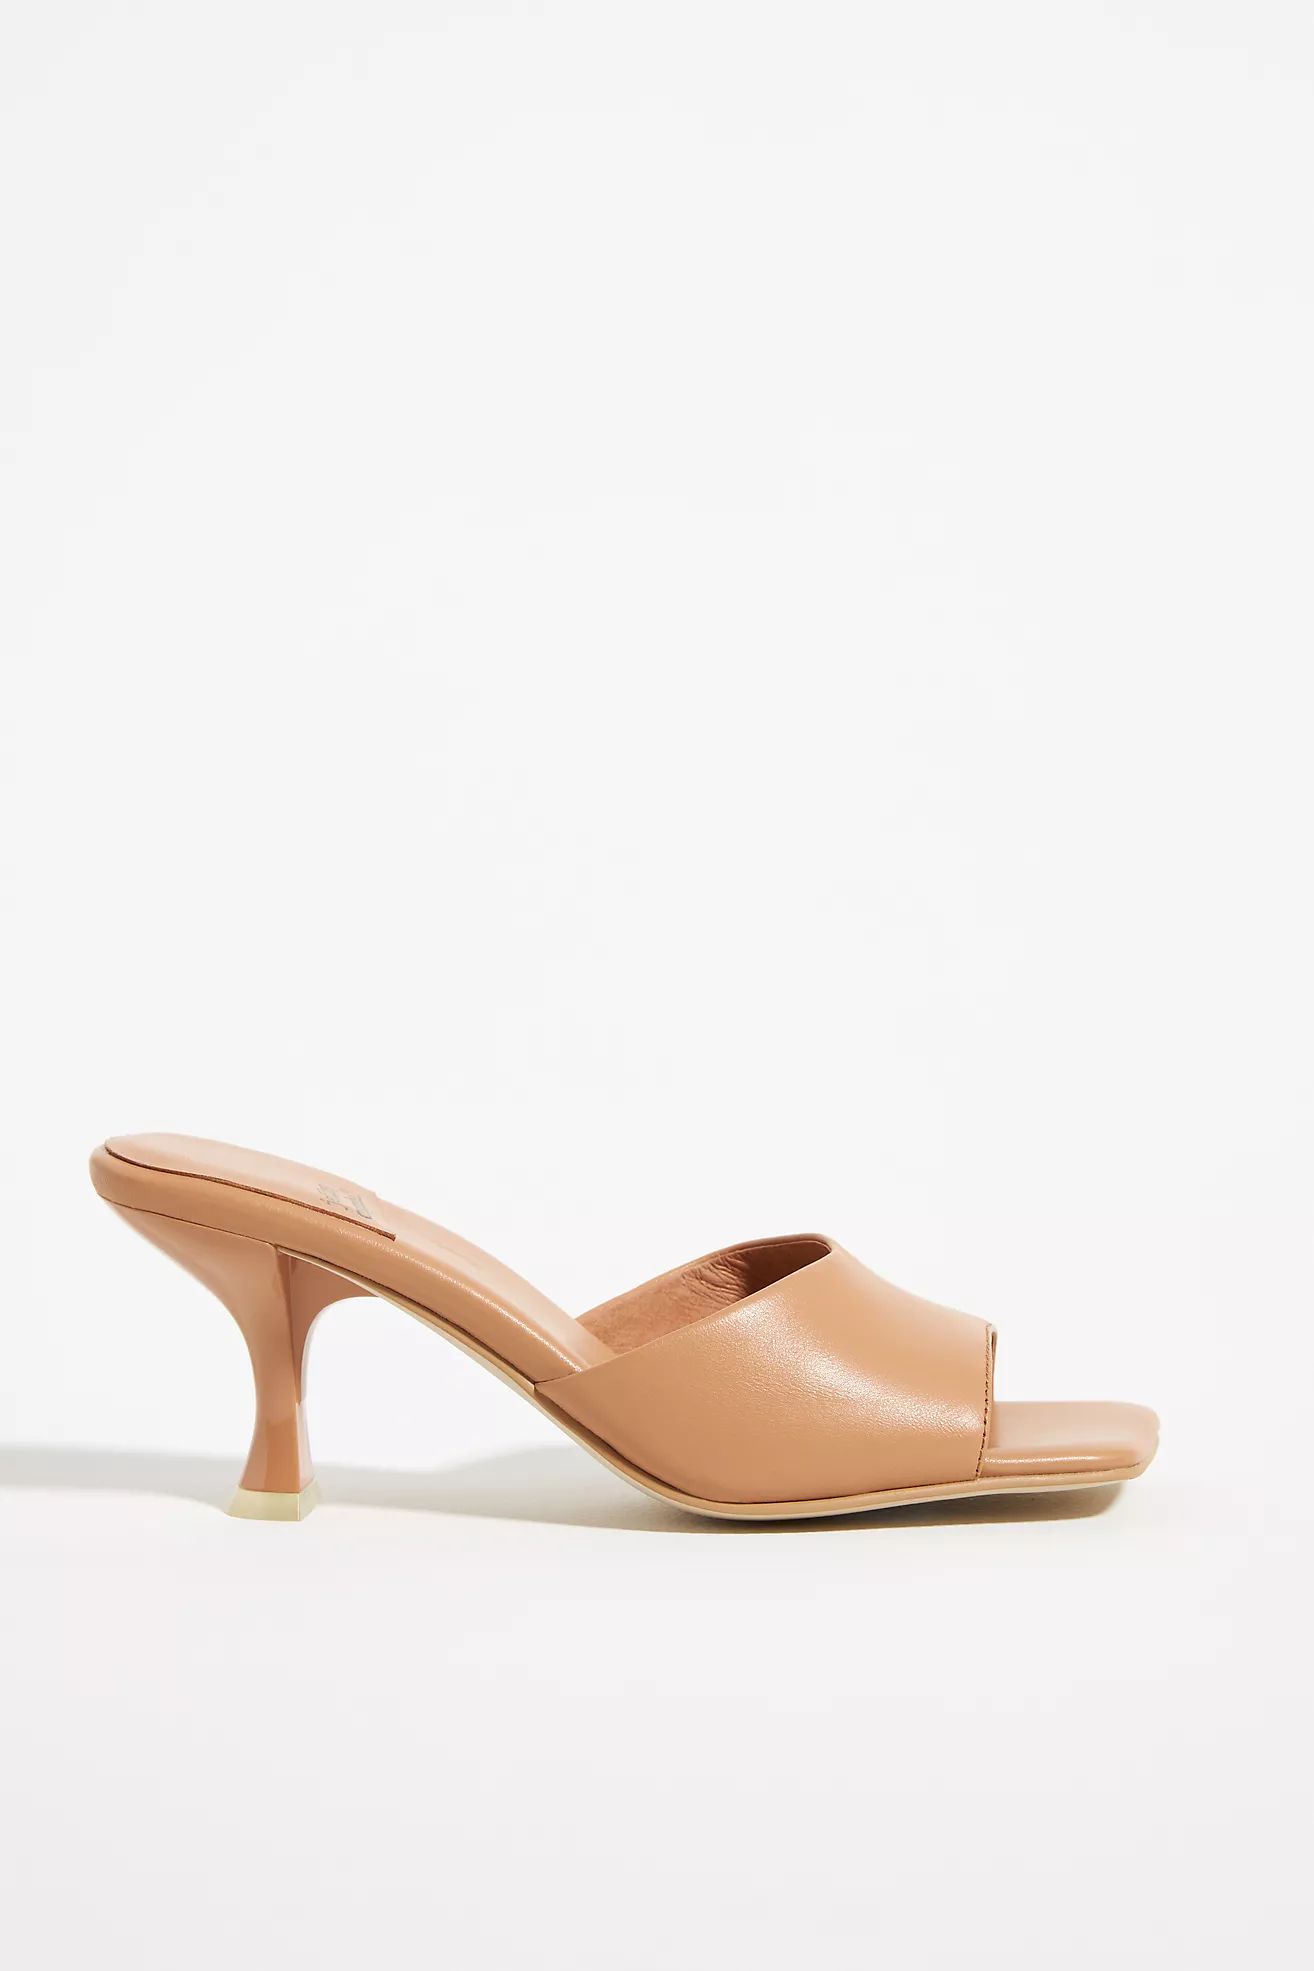 Jeffrey Campbell Square-Toe Mule | Anthropologie (US)